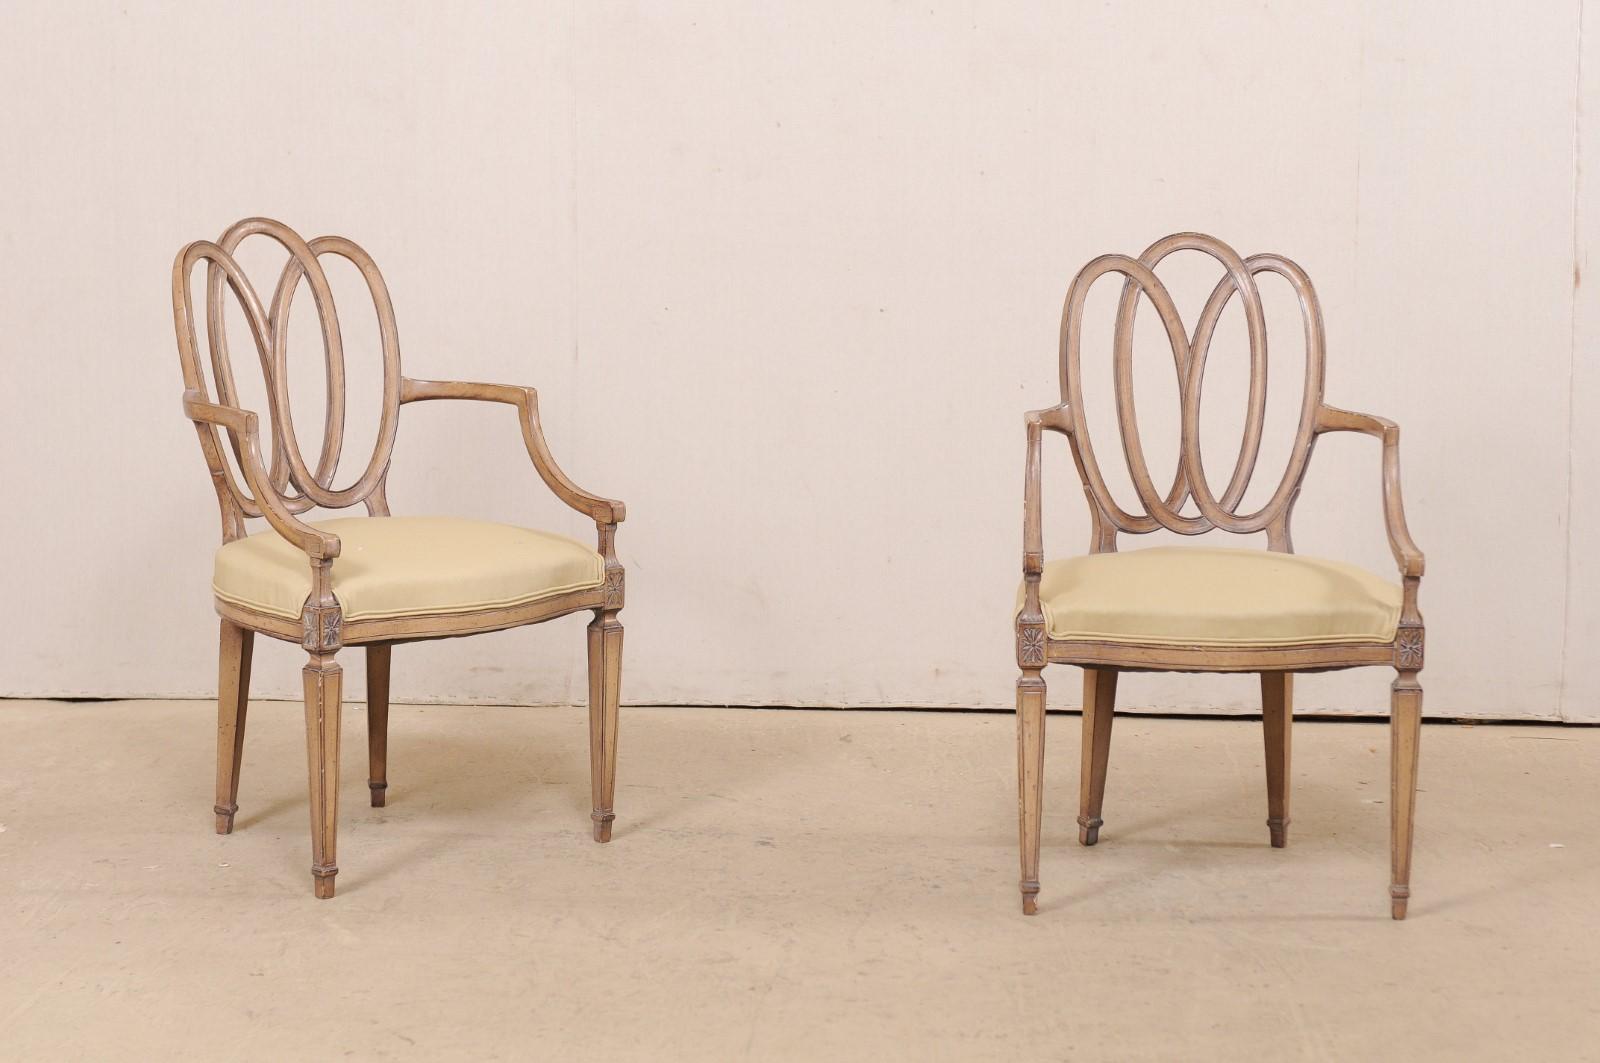 An Italian pair of carved wood armchairs with upholstered seats from the mid-20th century. This pair of occasional chairs from Italy have nicely entwined pierced oval-shaped backs, carved star accents adorn the apron at front seat rails, and they